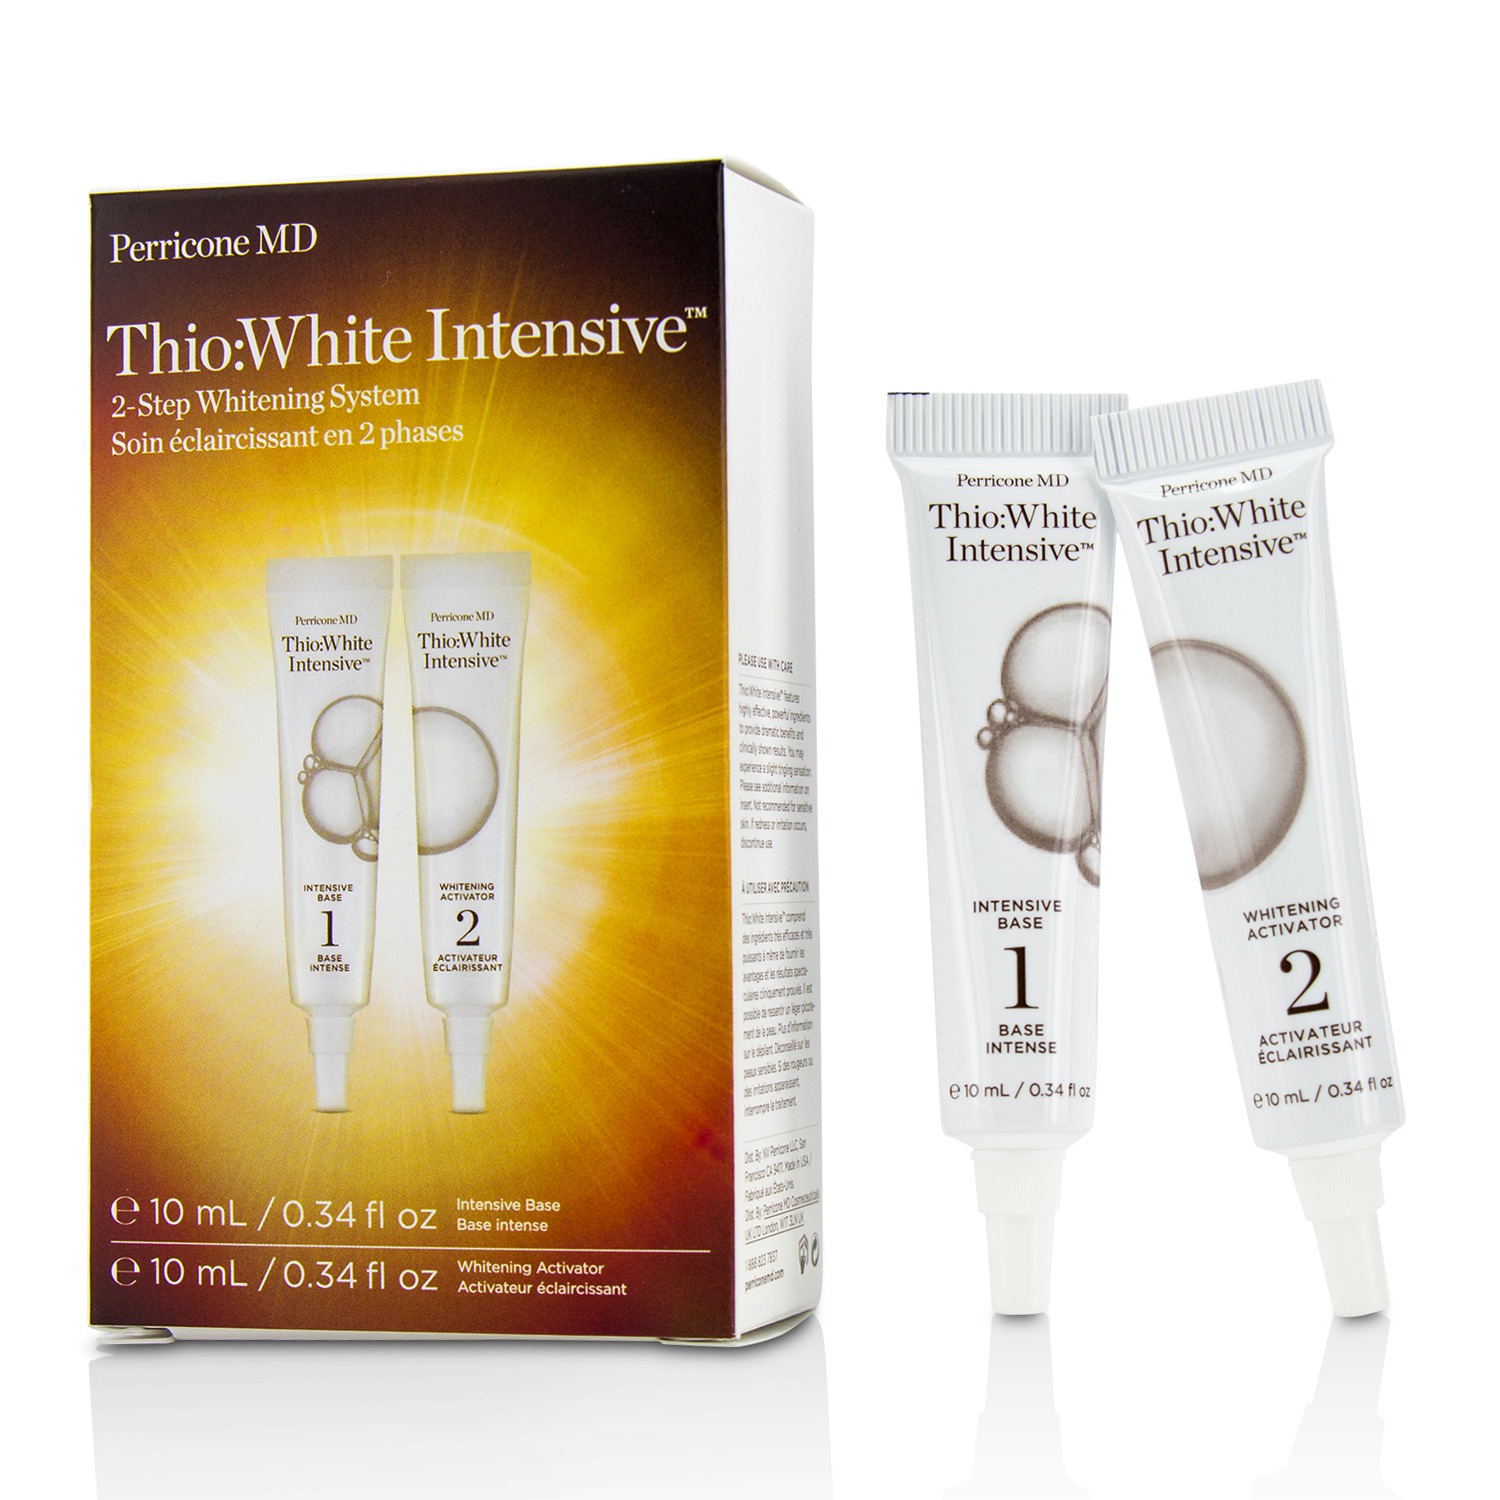 Thio: White Intensive 2-Step Whitening System Perricone MD Image